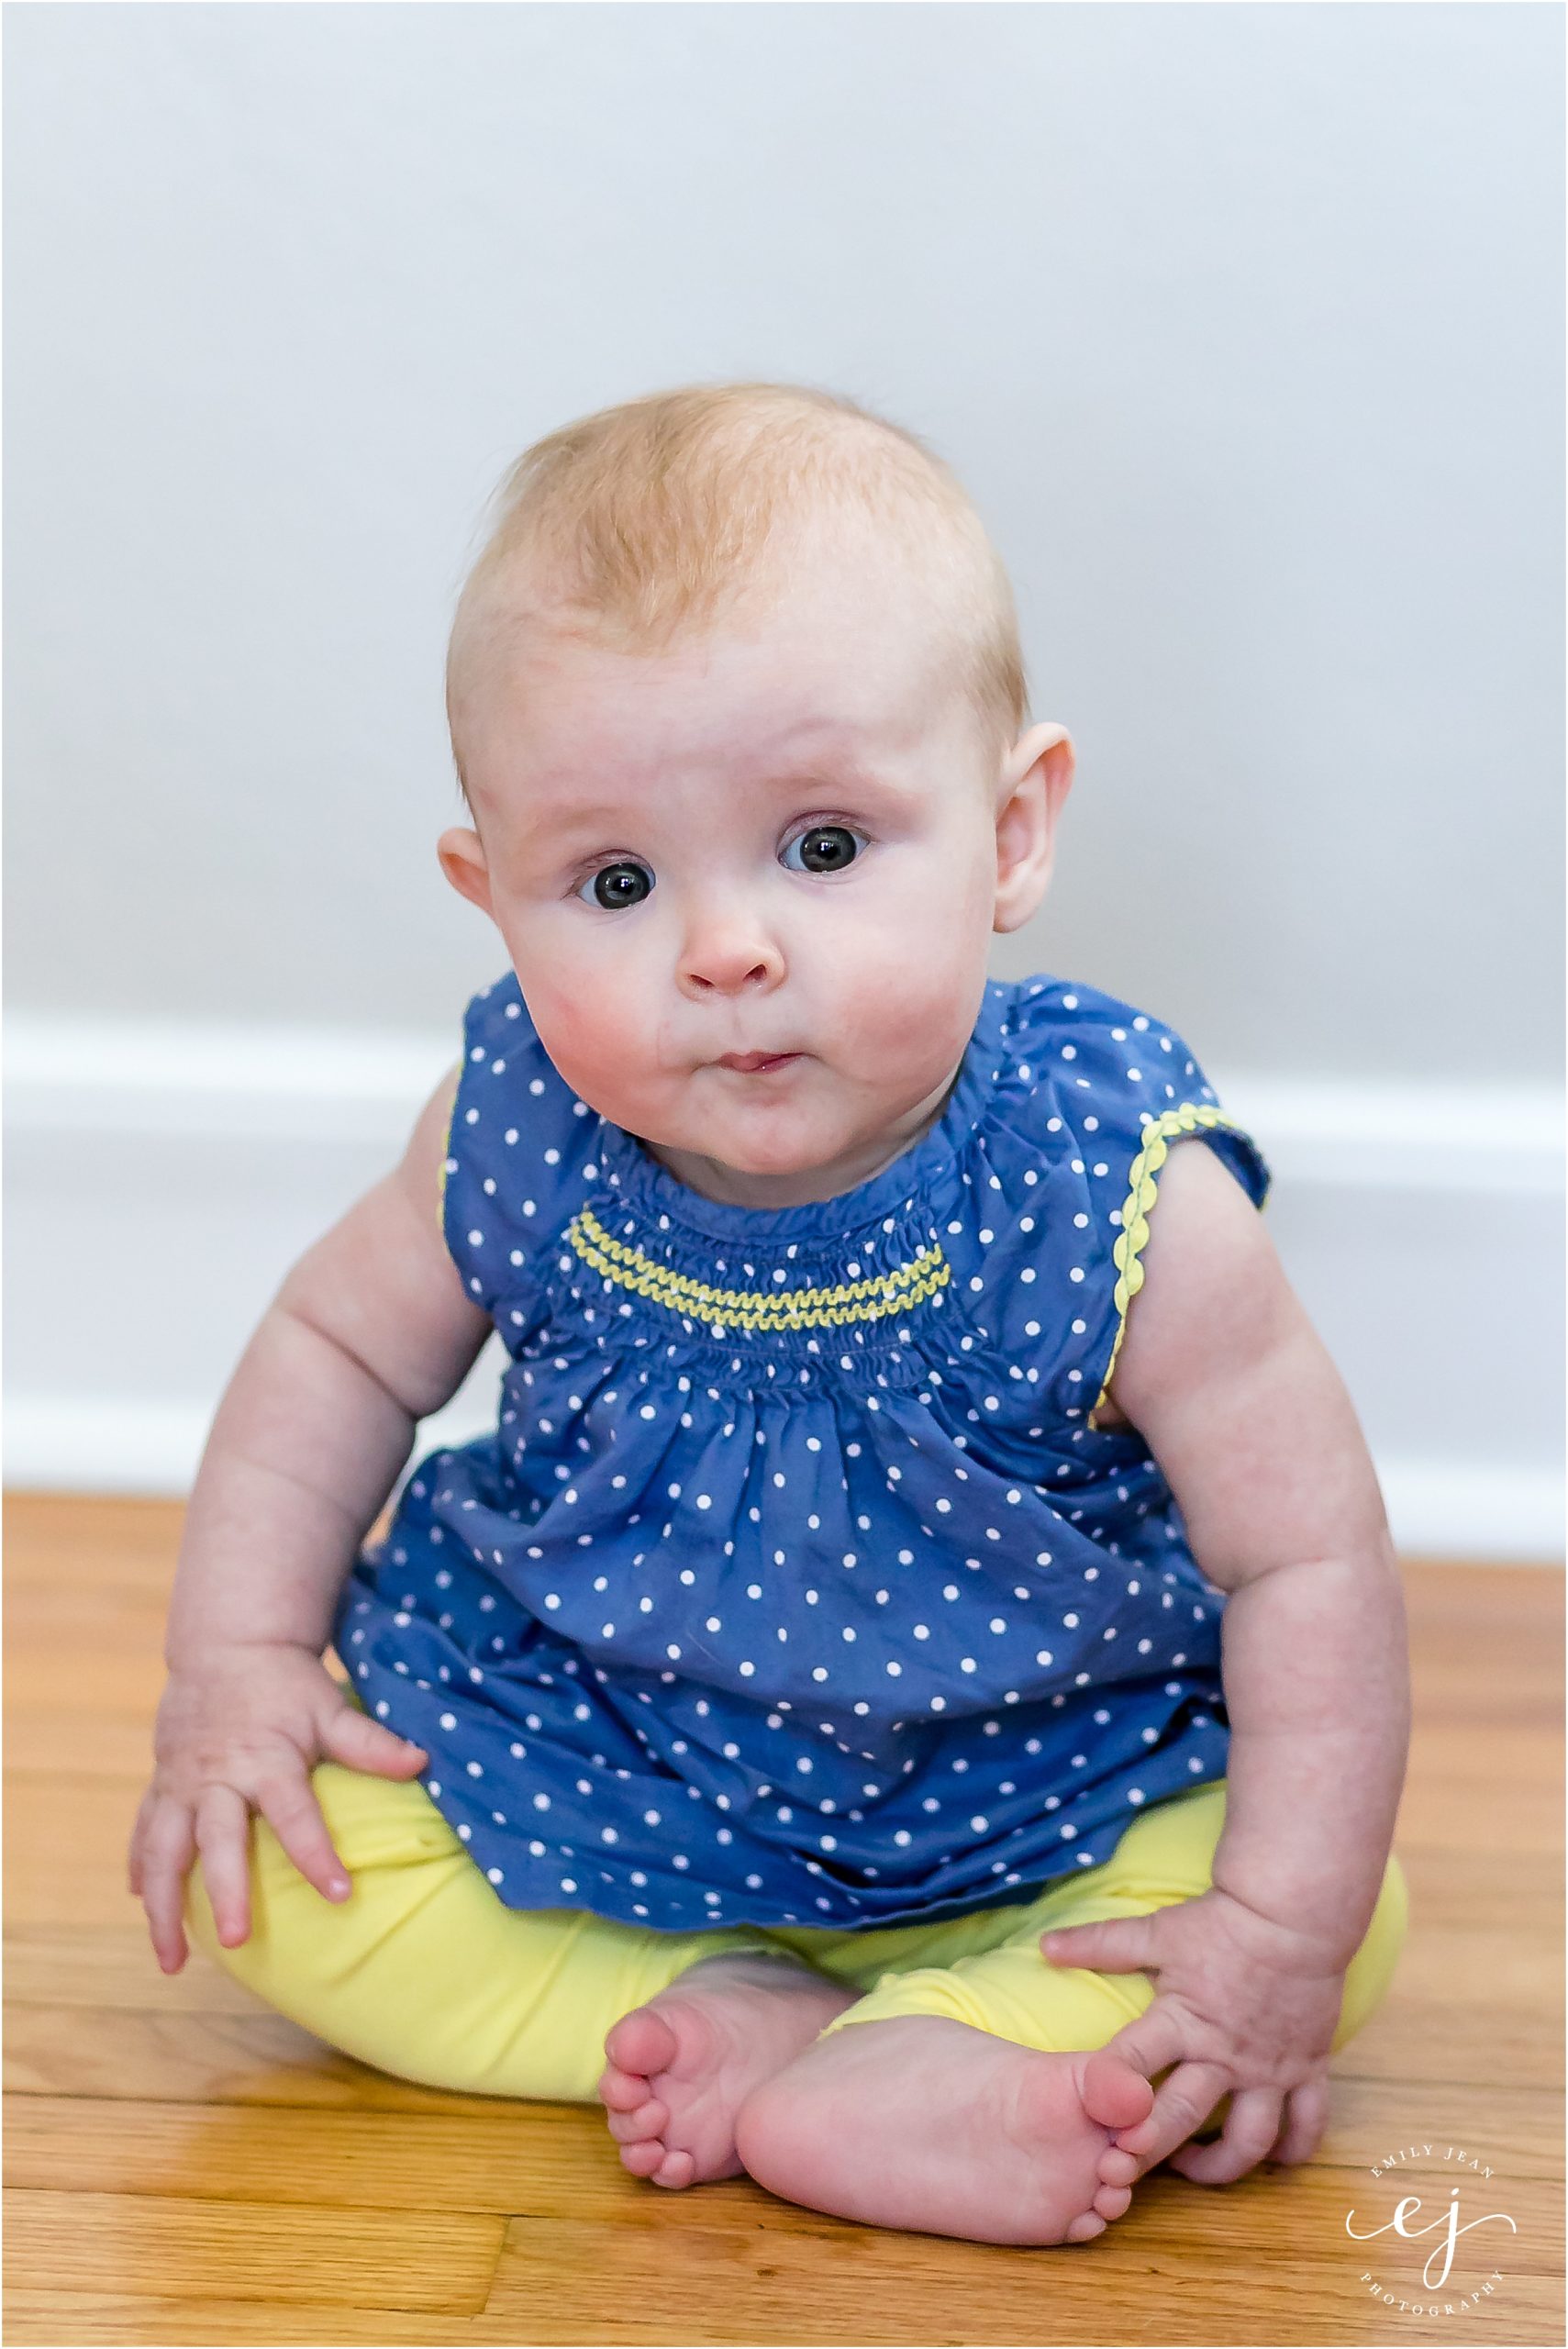 Five month old baby girl sitting on her own and blue shirt and yellow pants